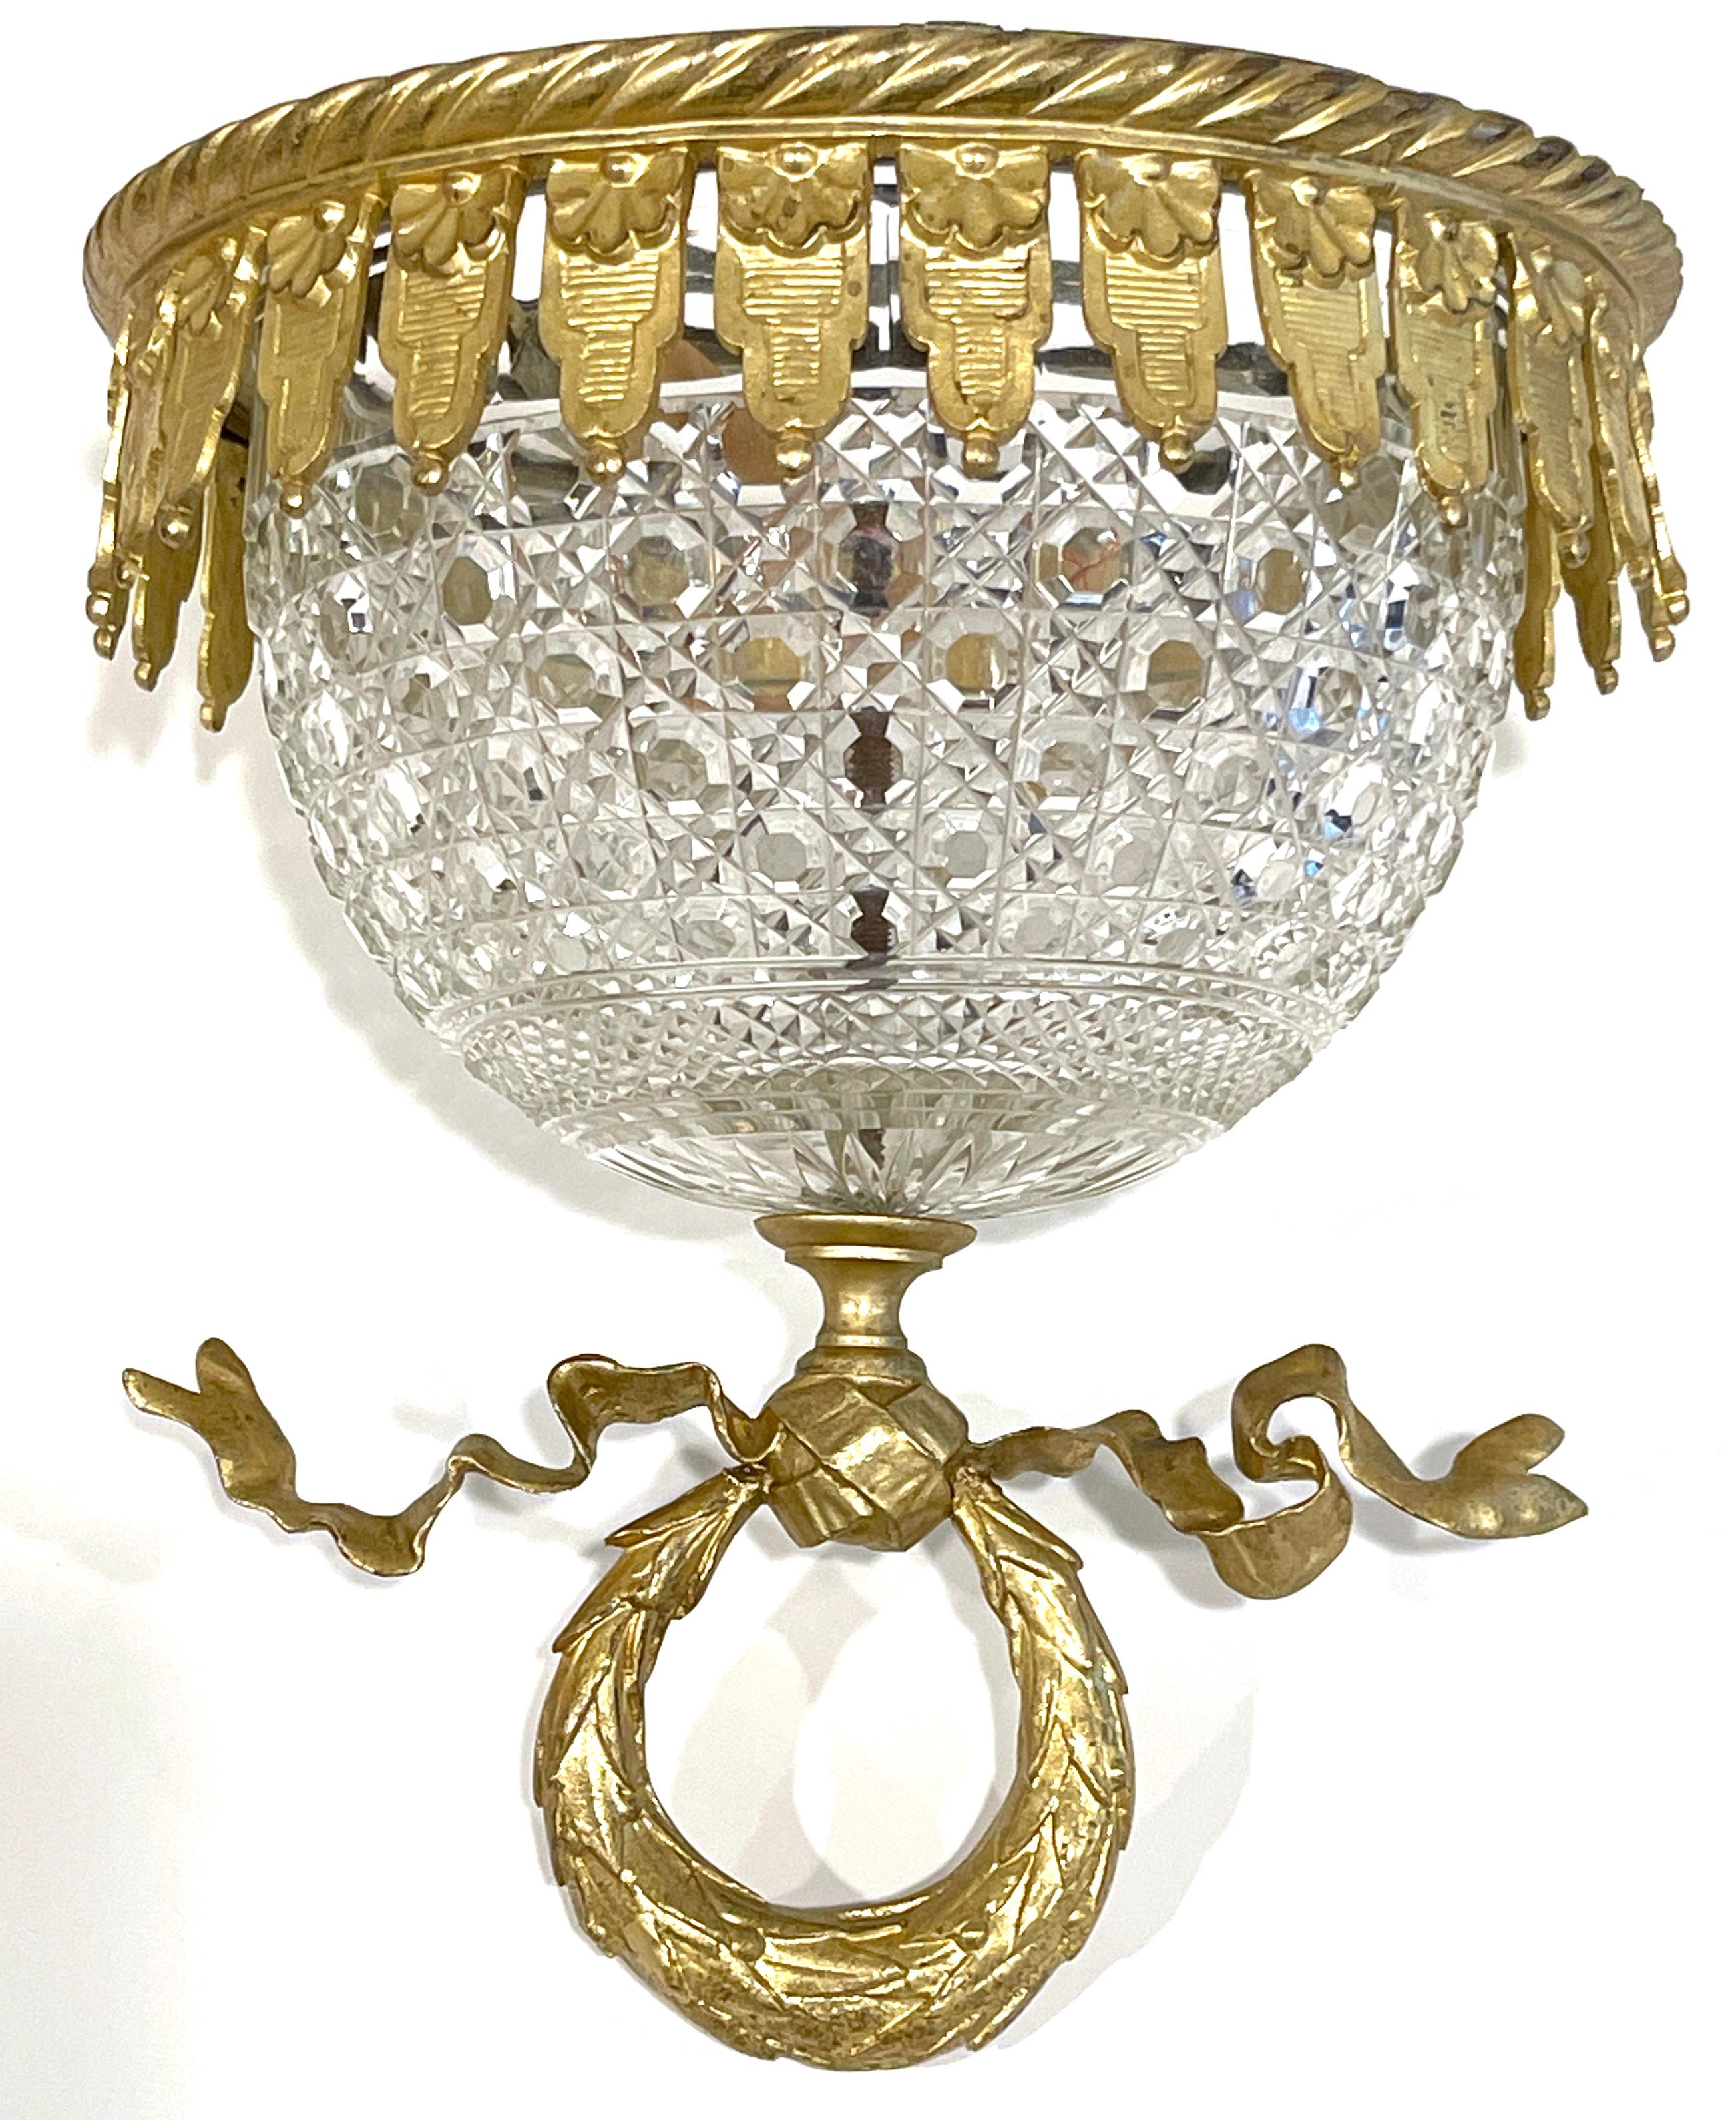 Antique French Ormolu mounted Baccarat ( atrib.) crystal flush mount chandelier.
France, circa 1900s
Attributed to Baccarat 

An impressive, diminutive work, which displays the superior craftsmanship and design of the Baccarat crystal works.